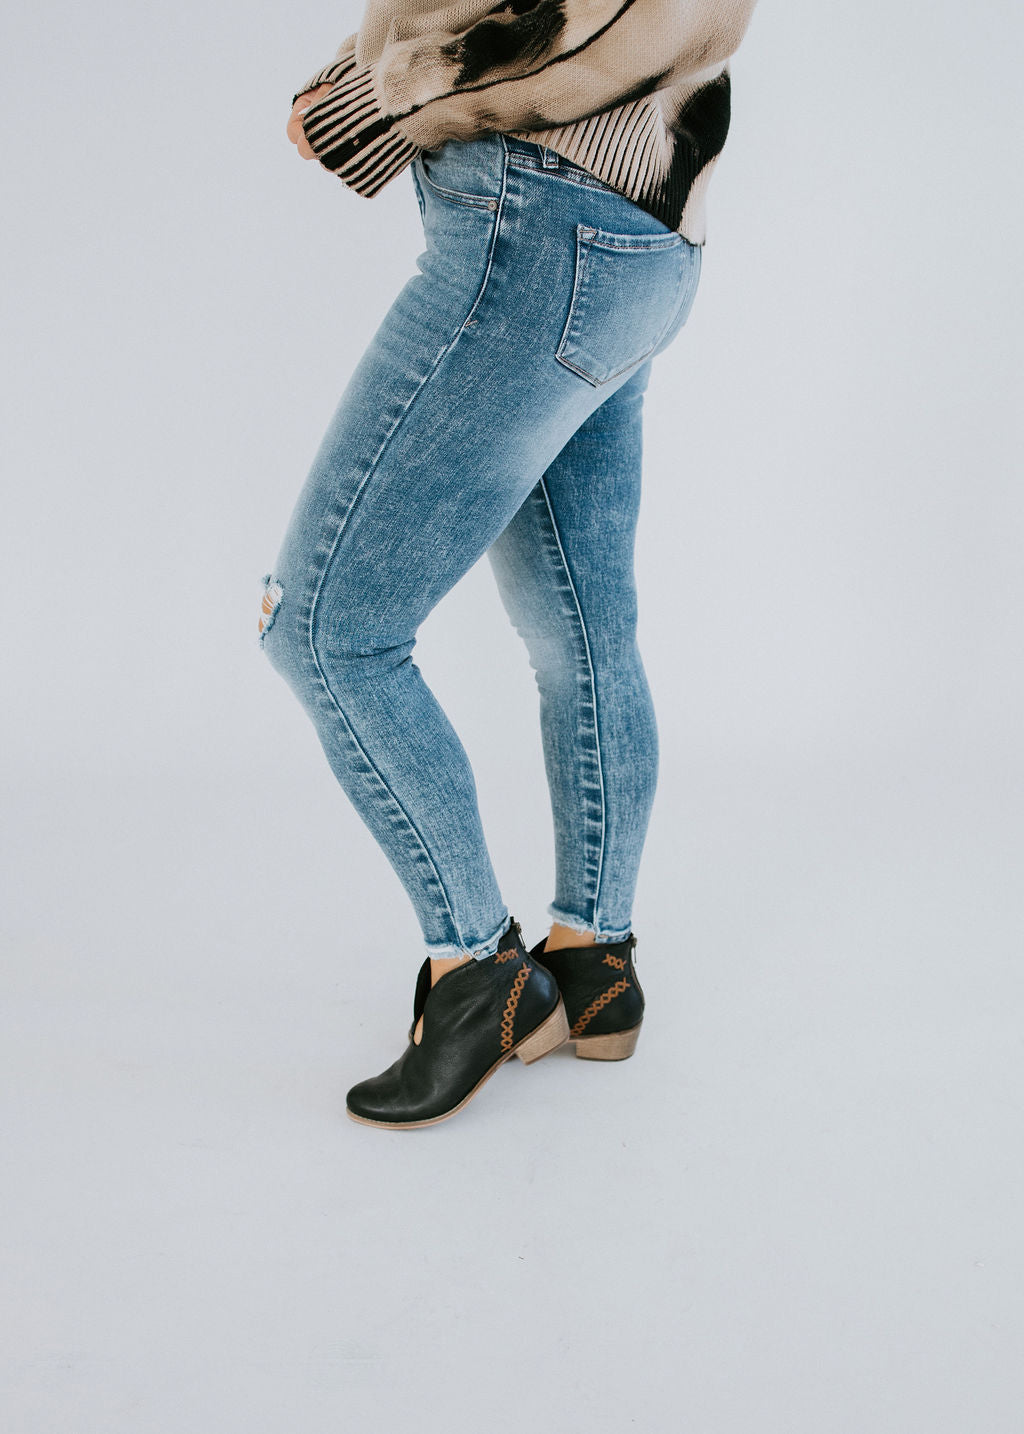 Overby Ankle Skinny KanCan Jean FINAL SALE